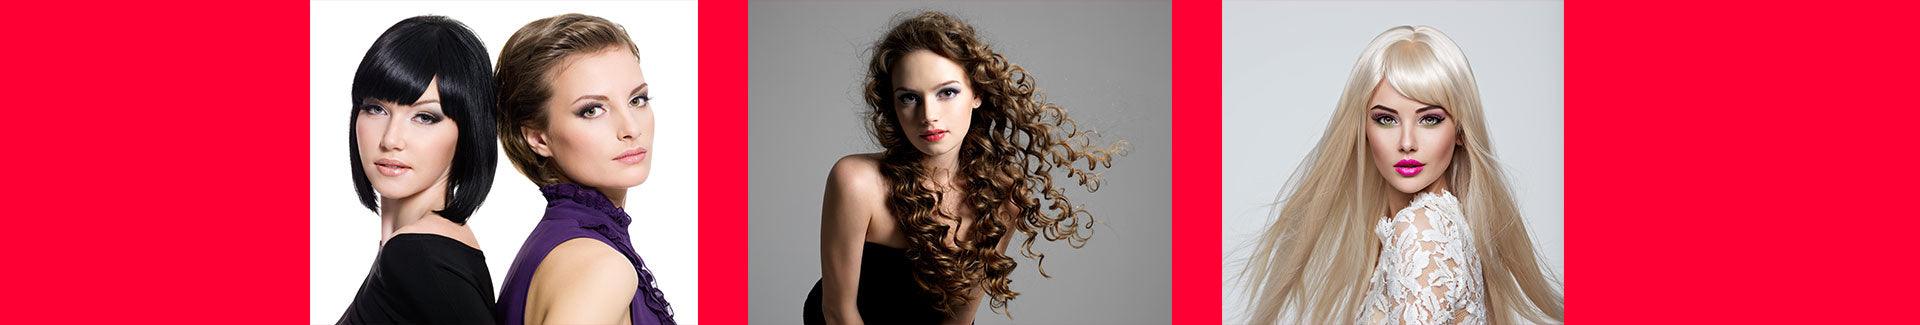 Buy Women Hair Products Online at Discounted Rates - Daily Fashion